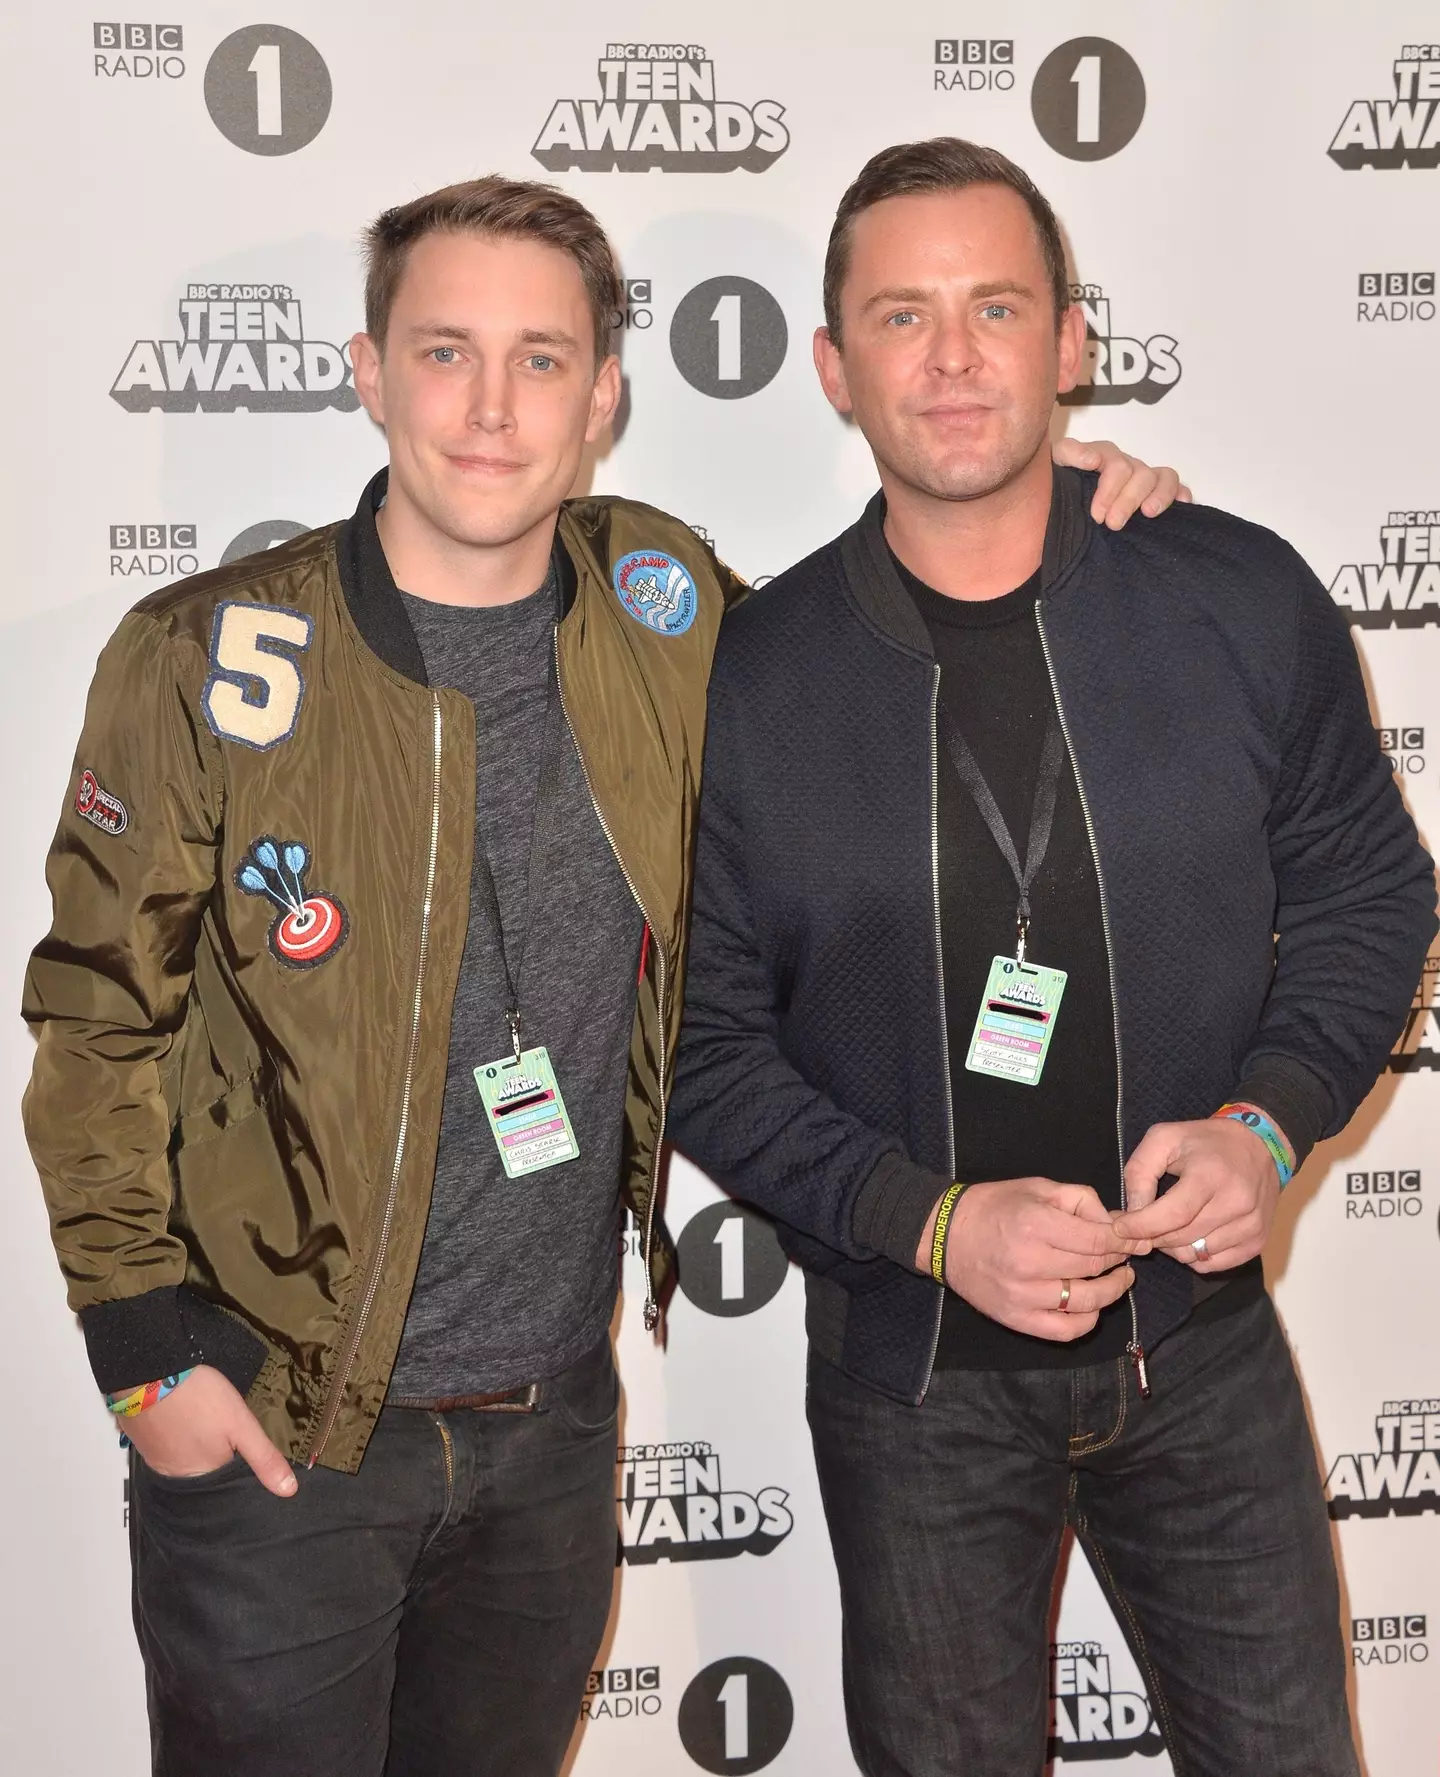 The pair are leaving Radio 1.